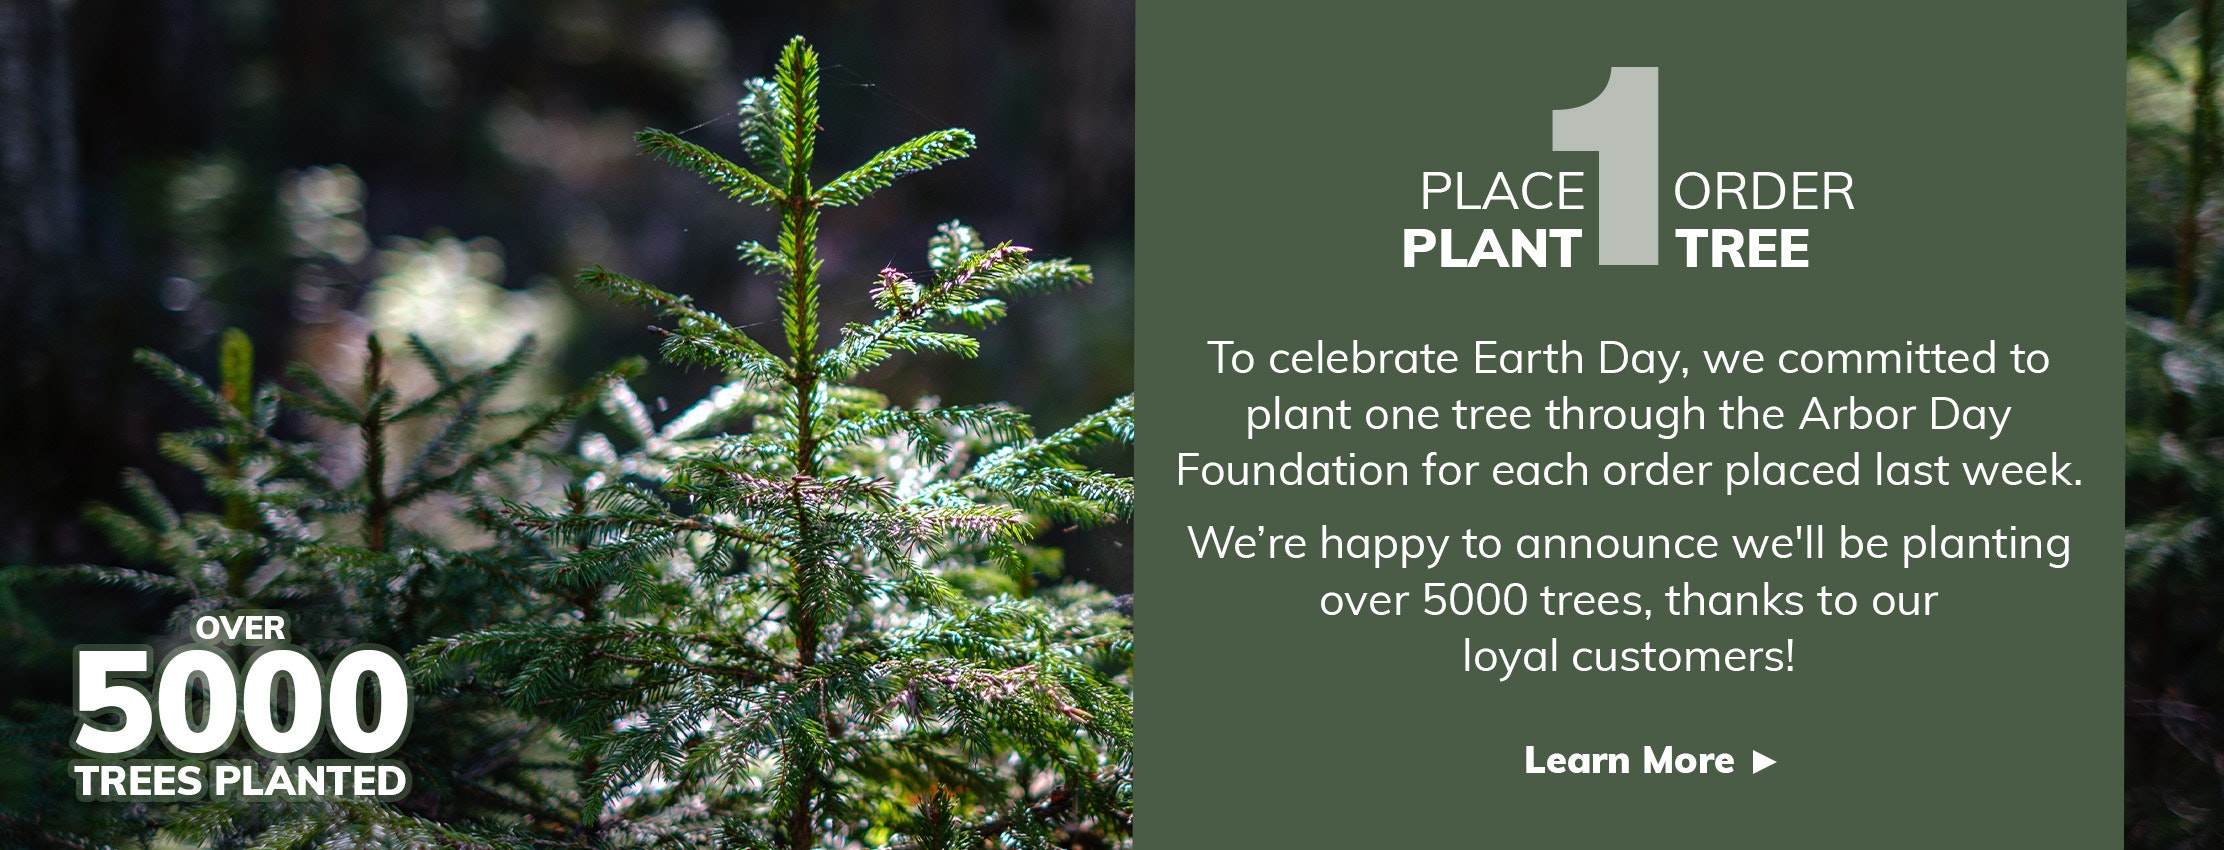 Photo of forest with text, 'Place 1 Order, Plant 1 Tree. To celebrate Earth Day, we committed to plant one tree through the Arbor Day Foundation for each order placed last week. We’re happy to announce we'll be planting over ???? trees, thanks to our loyal customers! Learn More.'